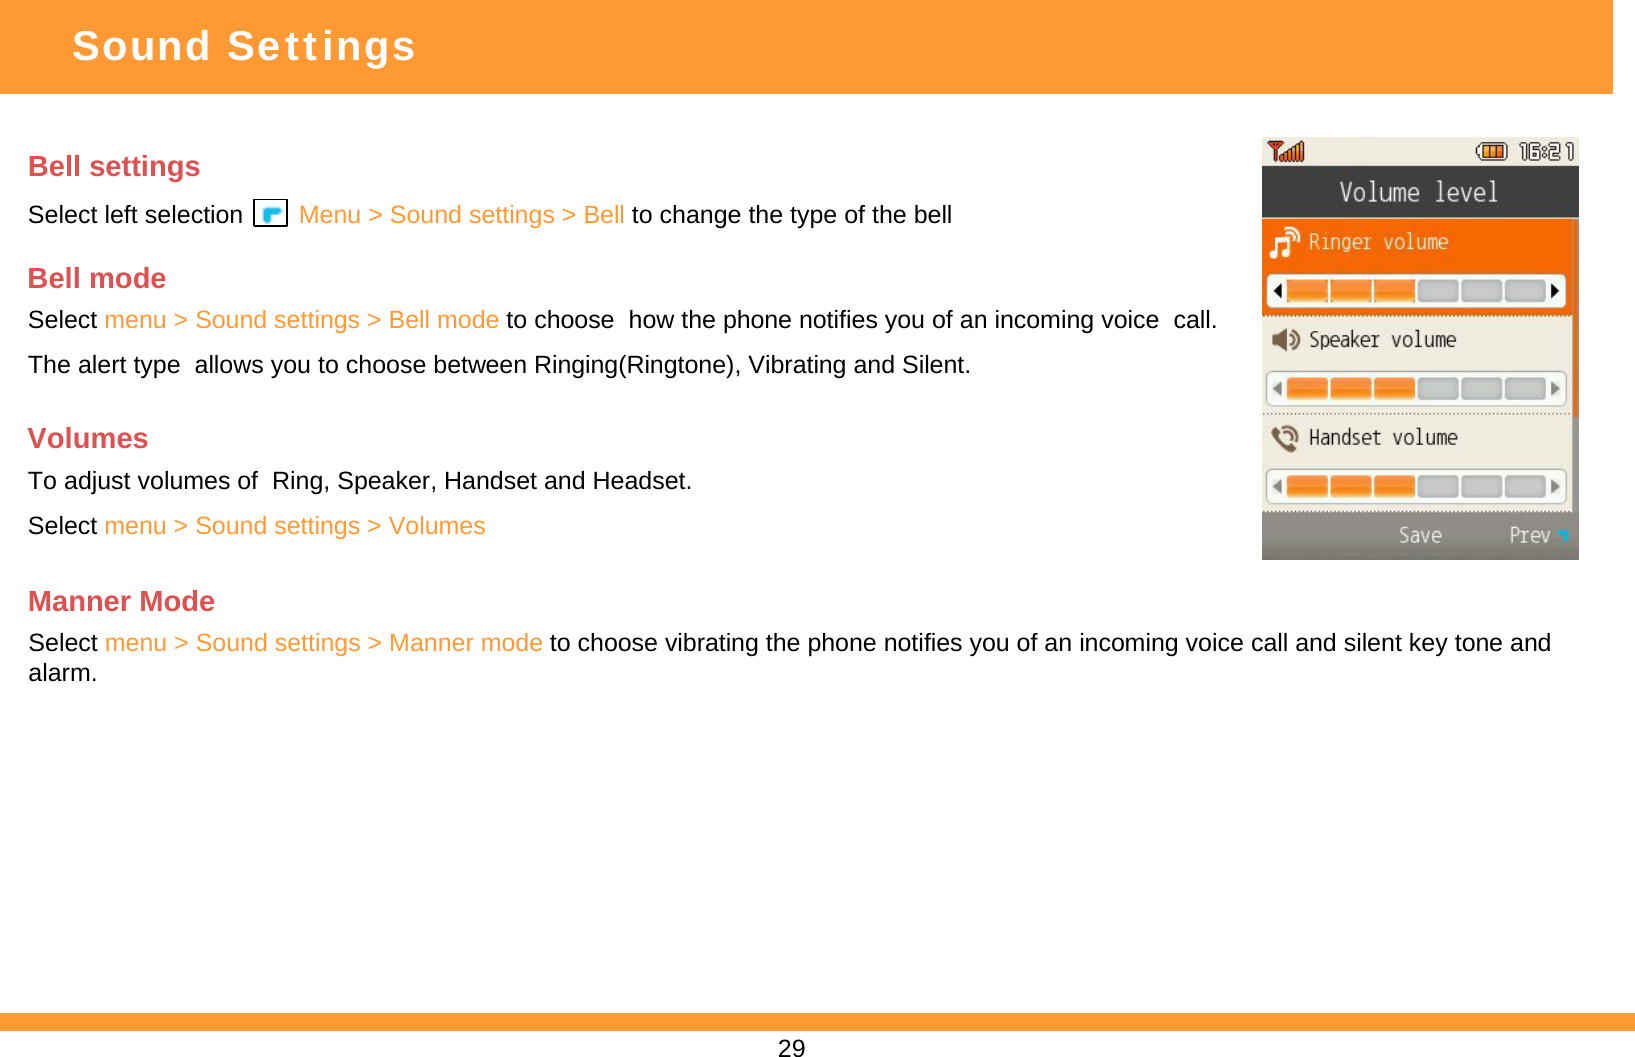 Bell settings Select left selection        Menu &gt; Sound settings &gt; Bell to change the type of the bell Sound SettingsBell modeSelect menu &gt; Sound settings &gt; Bell mode to choose  how the phone notifies you of an incoming voice  call.The alert type  allows you to choose between Ringing(Ringtone), Vibrating and Silent.VolumesTo adjust volumes of  Ring, Speaker, Handset and Headset.Select menu &gt; Sound settings &gt; VolumesManner ModeSelect menu &gt; Sound settings &gt; Manner mode to choose vibrating the phone notifies you of an incoming voice call and silent key tone and alarm.29